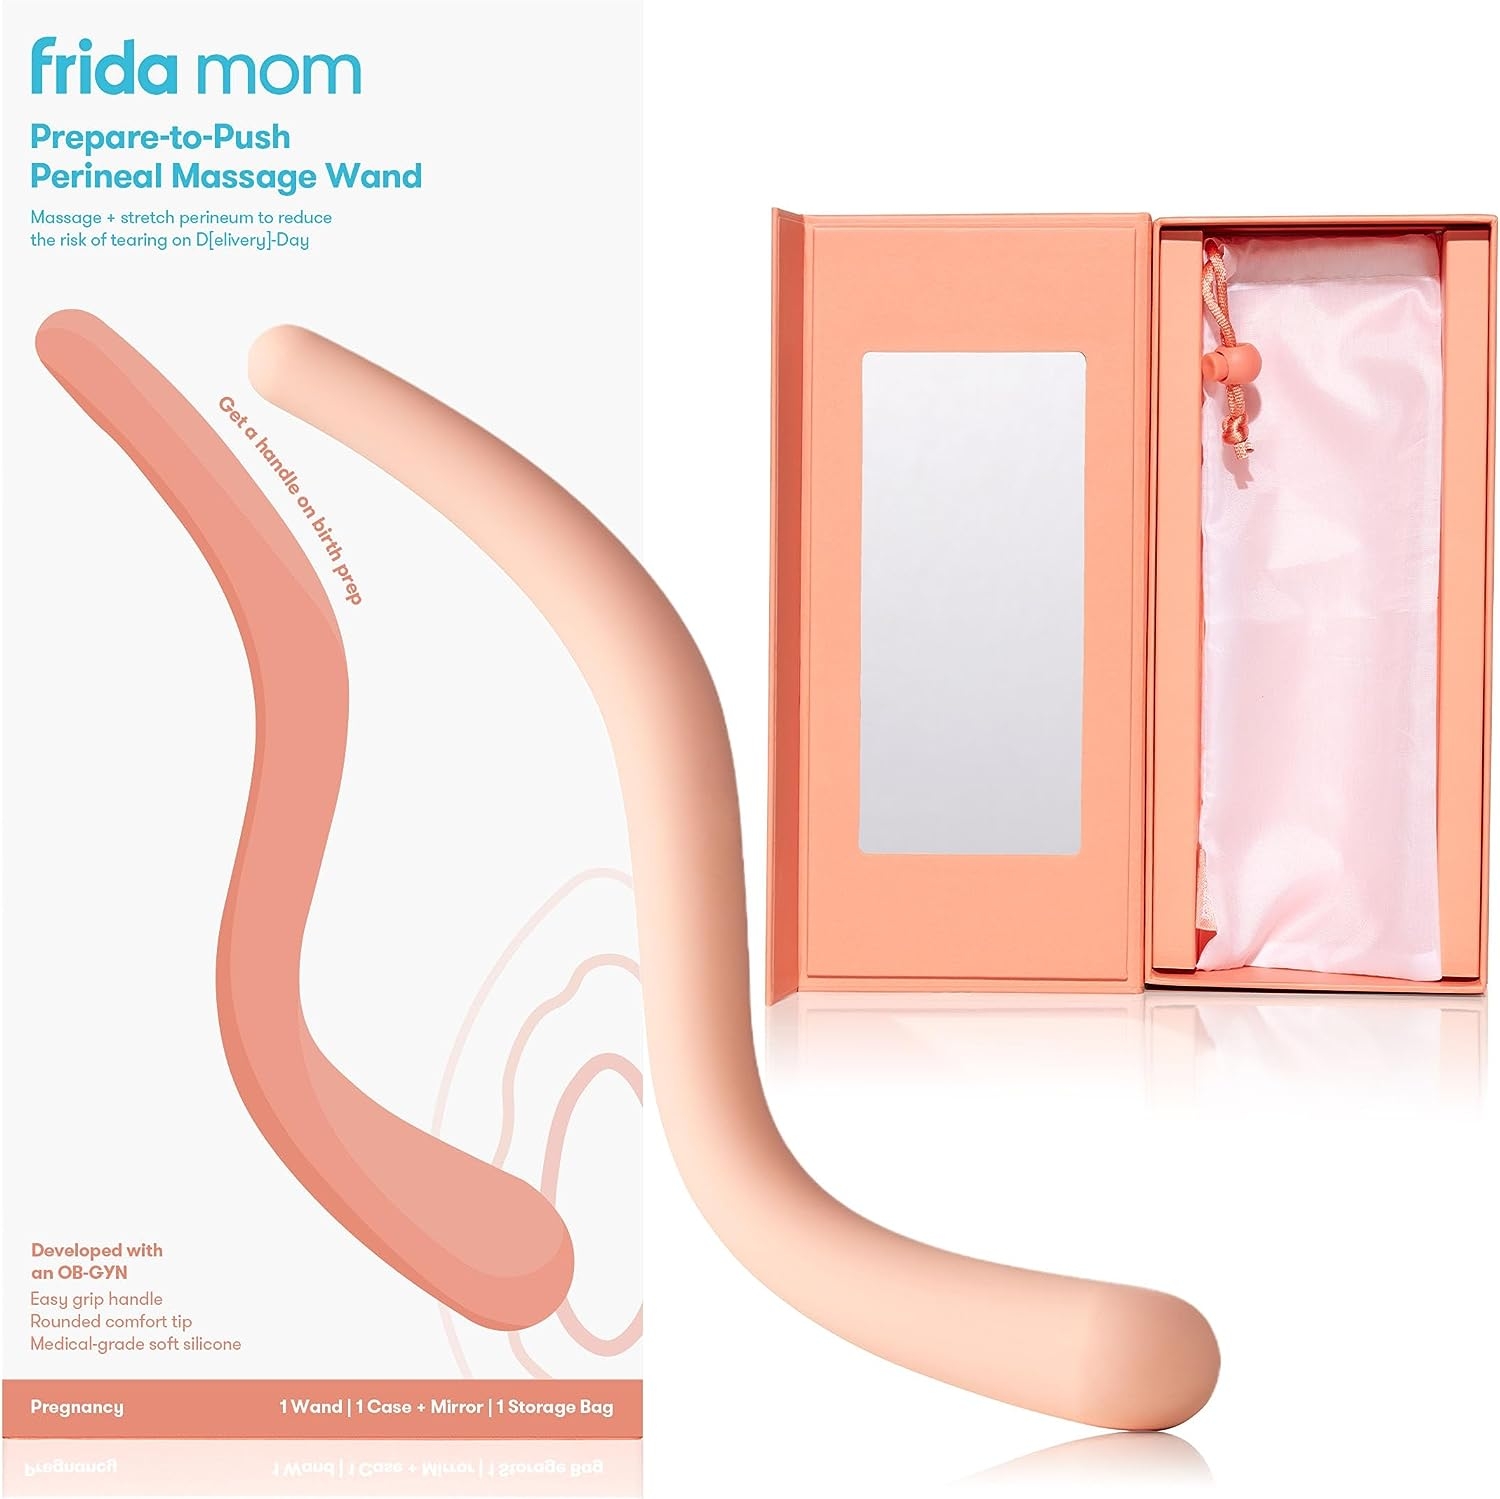 Frida Mom Prepare-to-Push Perineal Massage Wand – Massage + Stretch Perineum to Reduce Risk of Tearing   price checker   price